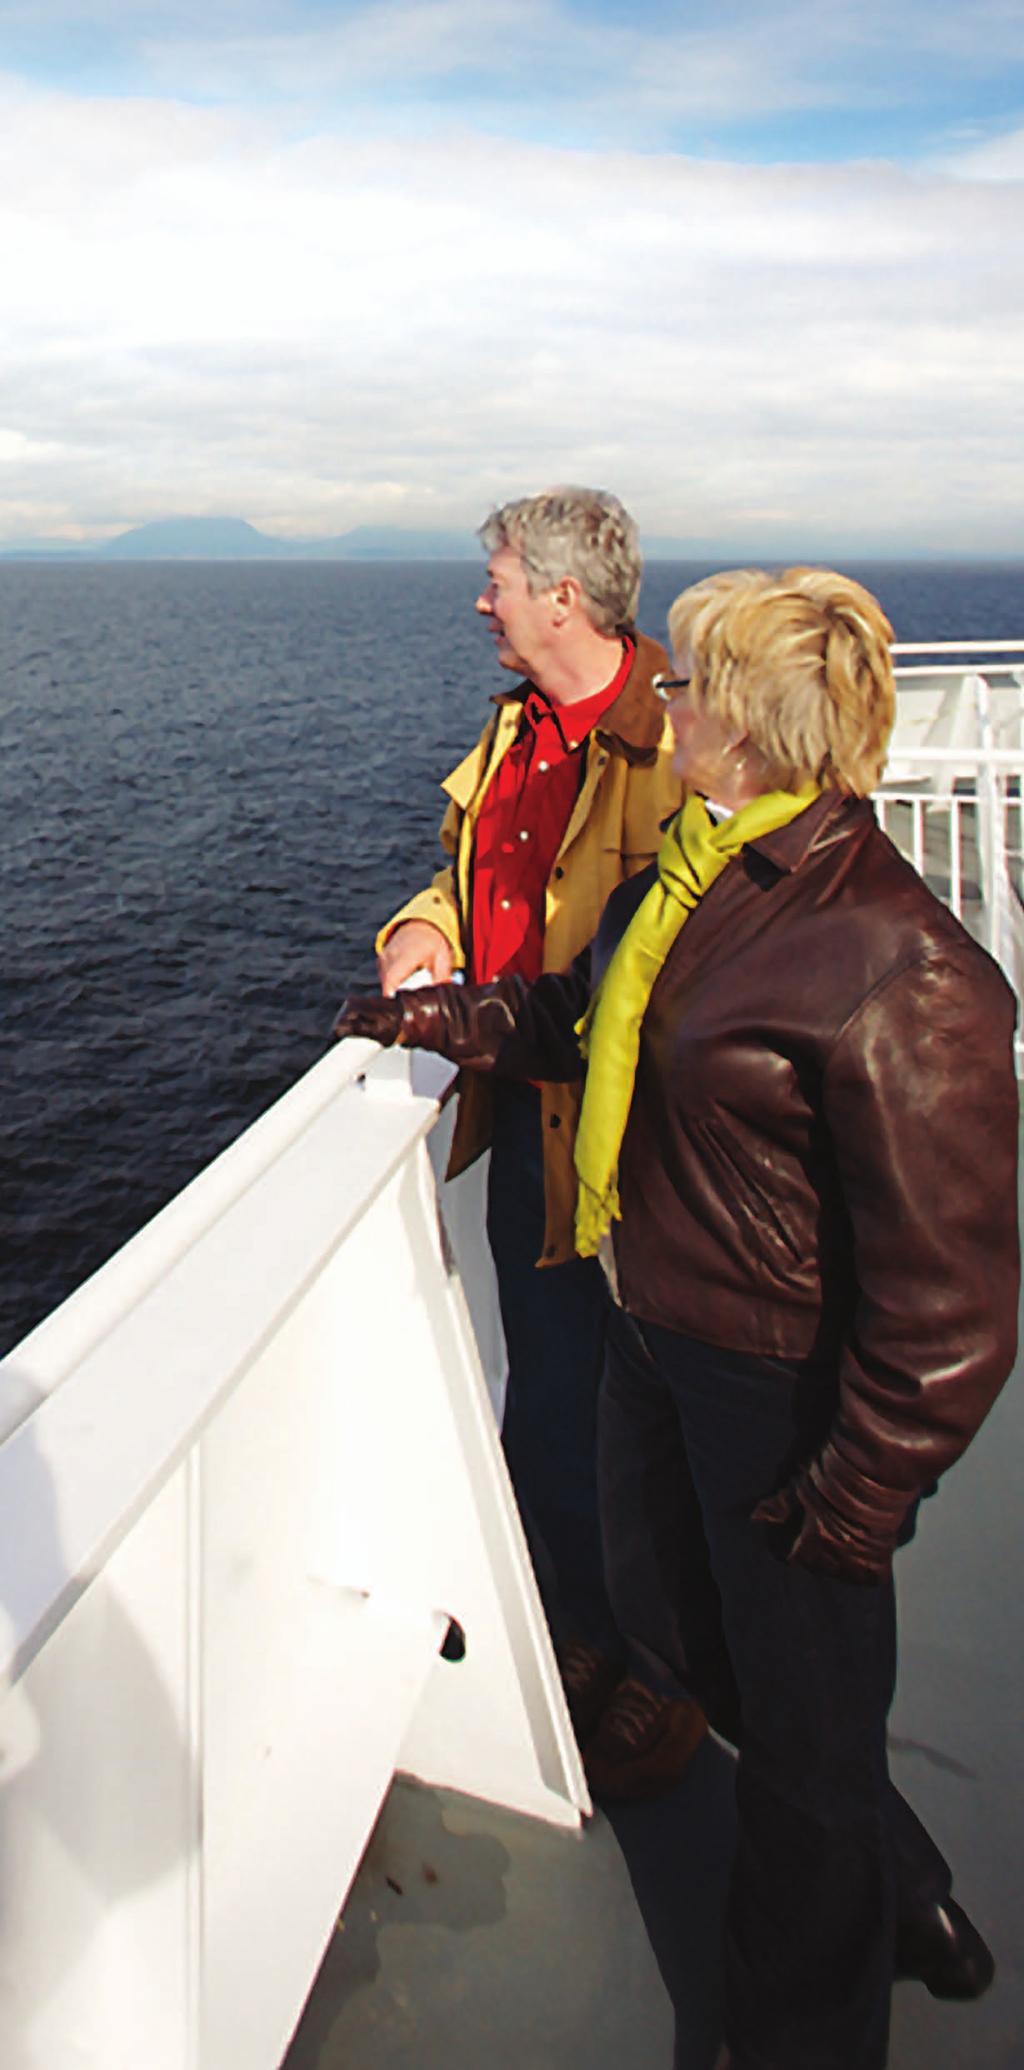 A Consultation and Engagement on the B.C. Coastal Ferry Service The B.C. coastal ferry service has been wrestling with cost pressures for more than 20 years.